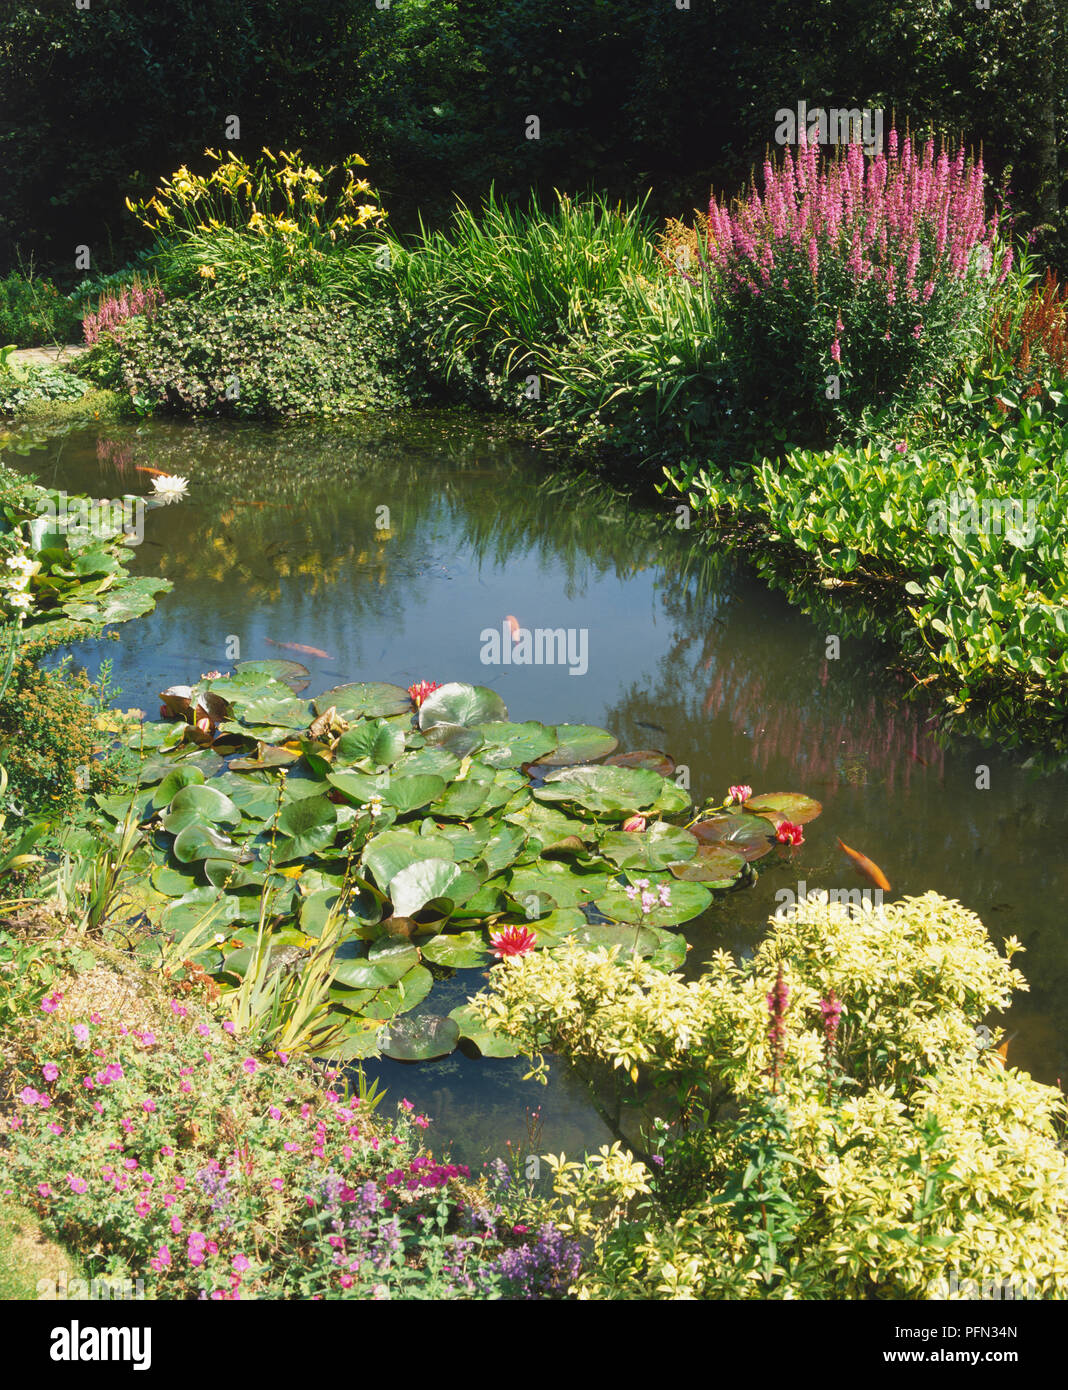 Pond with plants, including purple Loosestrife, Day Lilies, Astilbes, Bogbean and Waterlilies, and gold fish swimming inside. Stock Photo